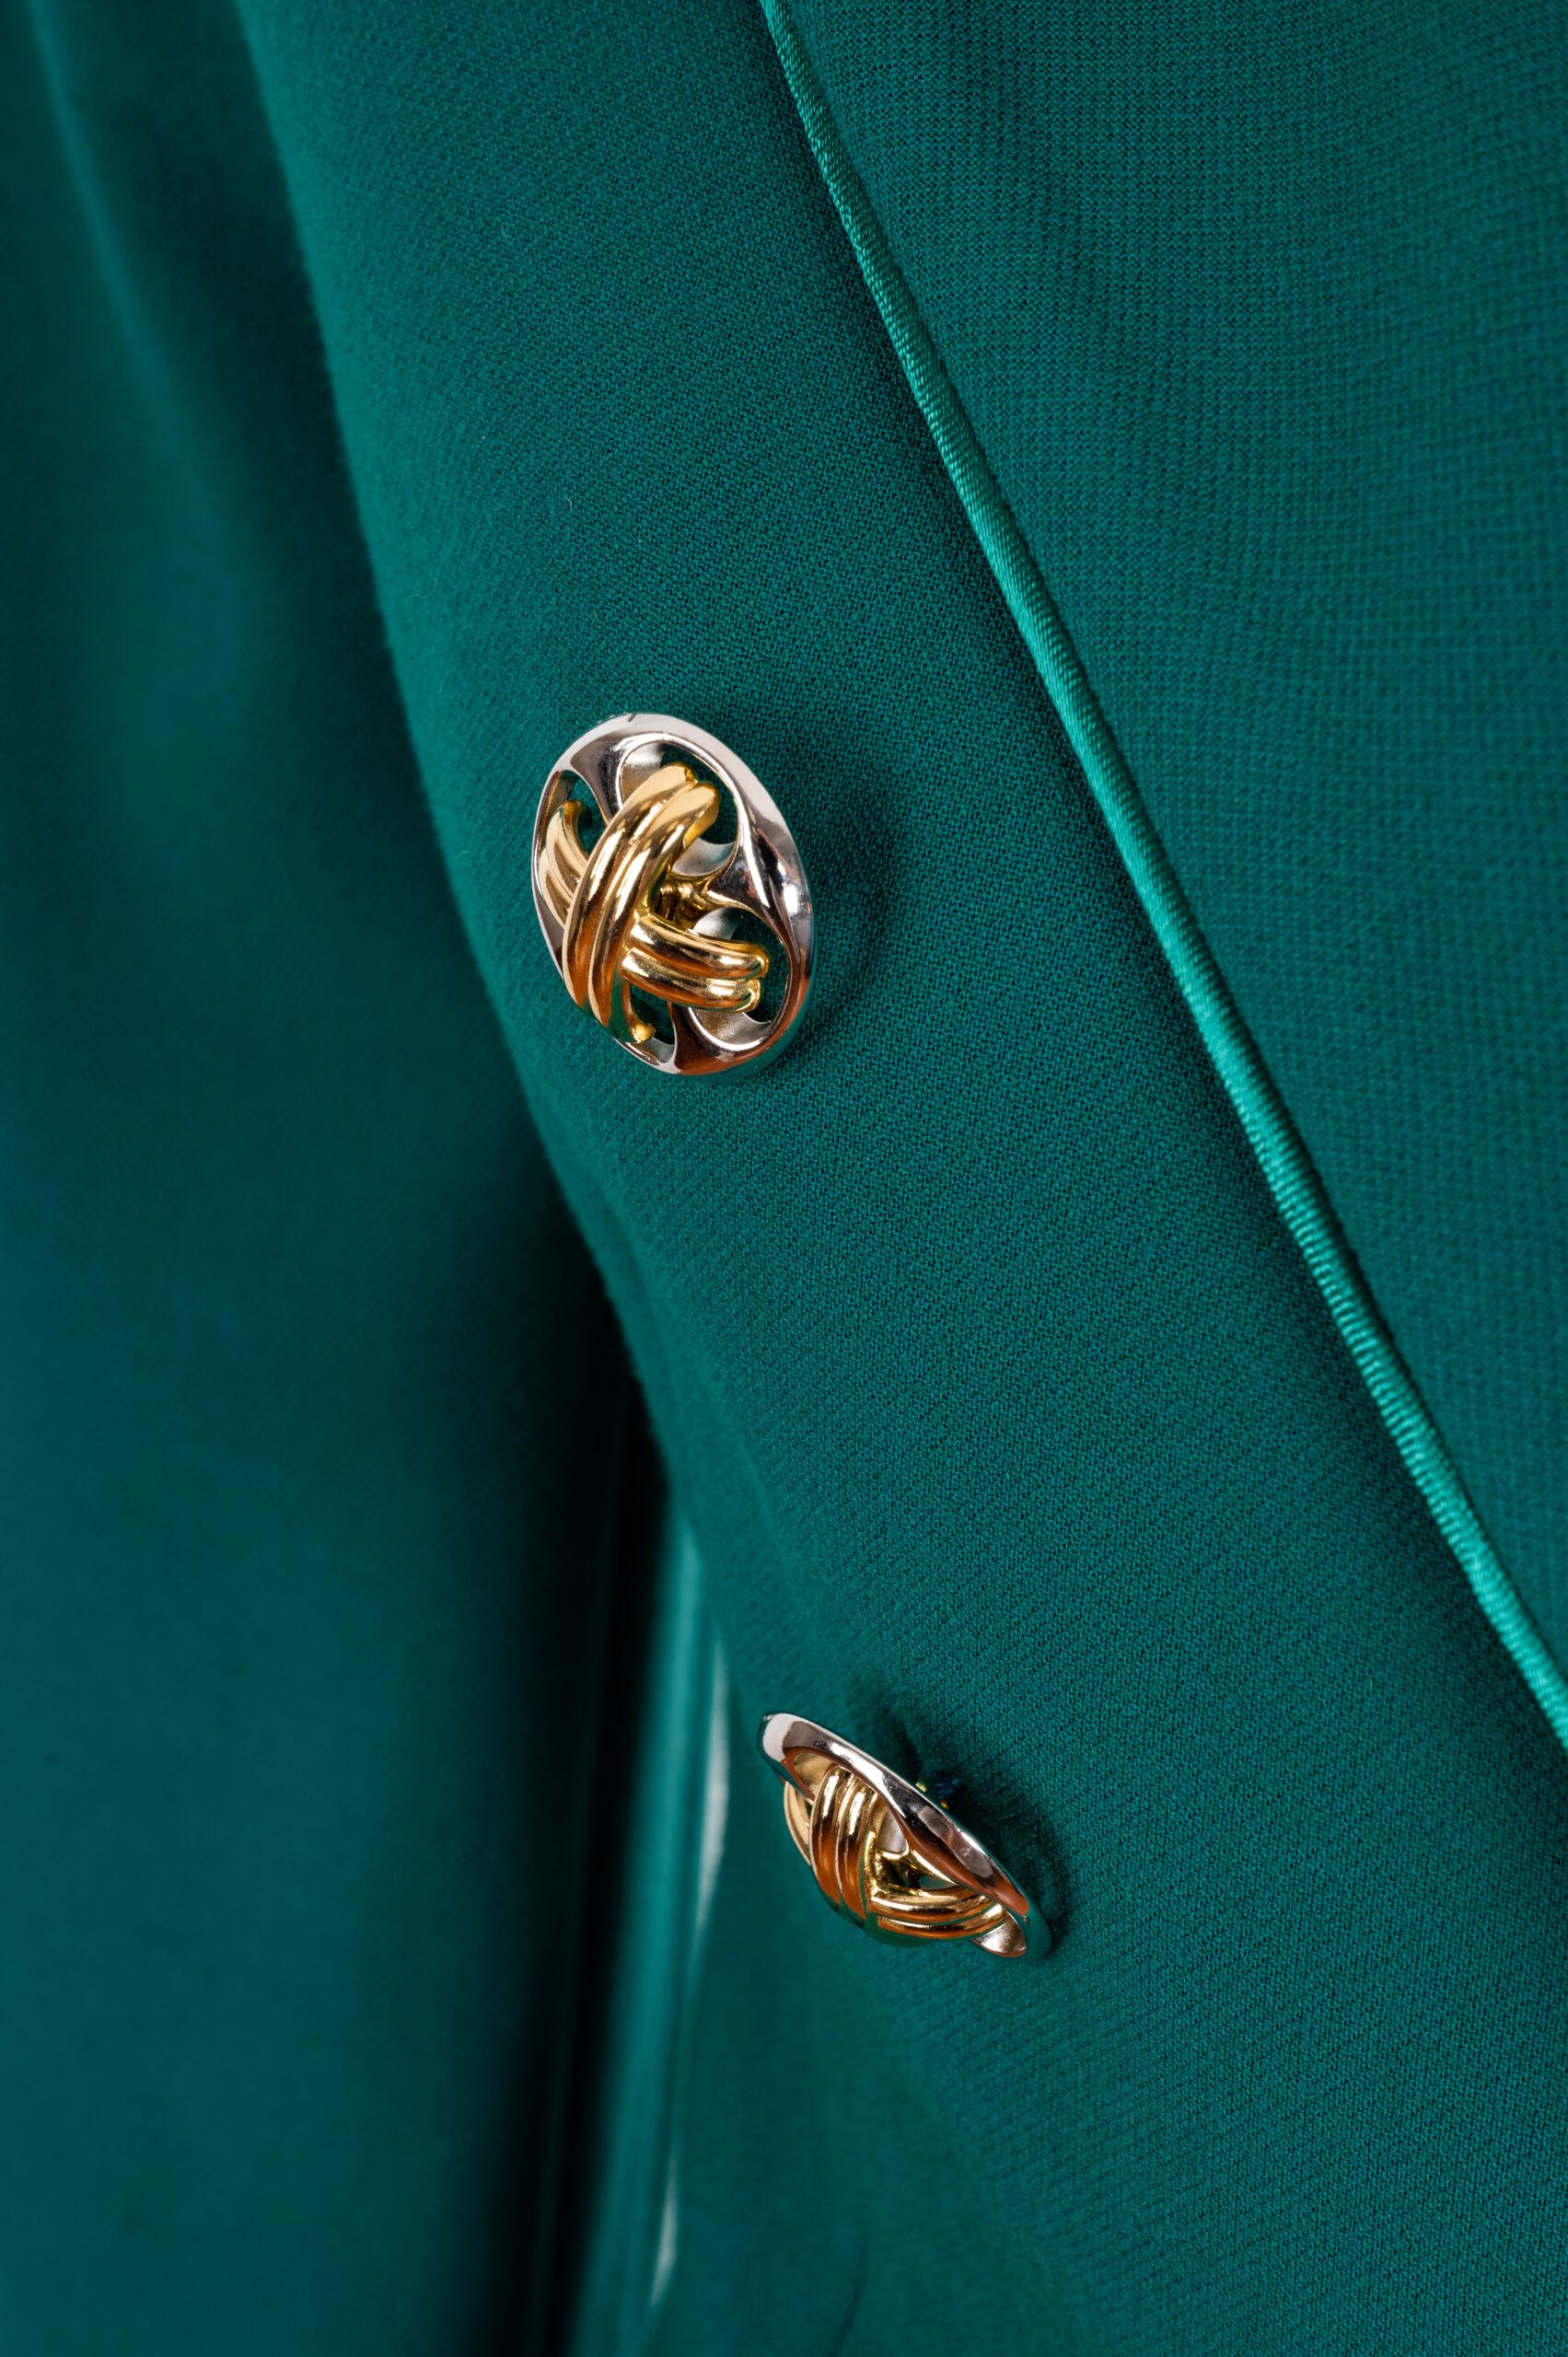 Our signature double-breasted blazer in emerald green, a nod to the Pantone Color of the Year. A style that looks equally chic worn with the matching pencil skirt or jeans